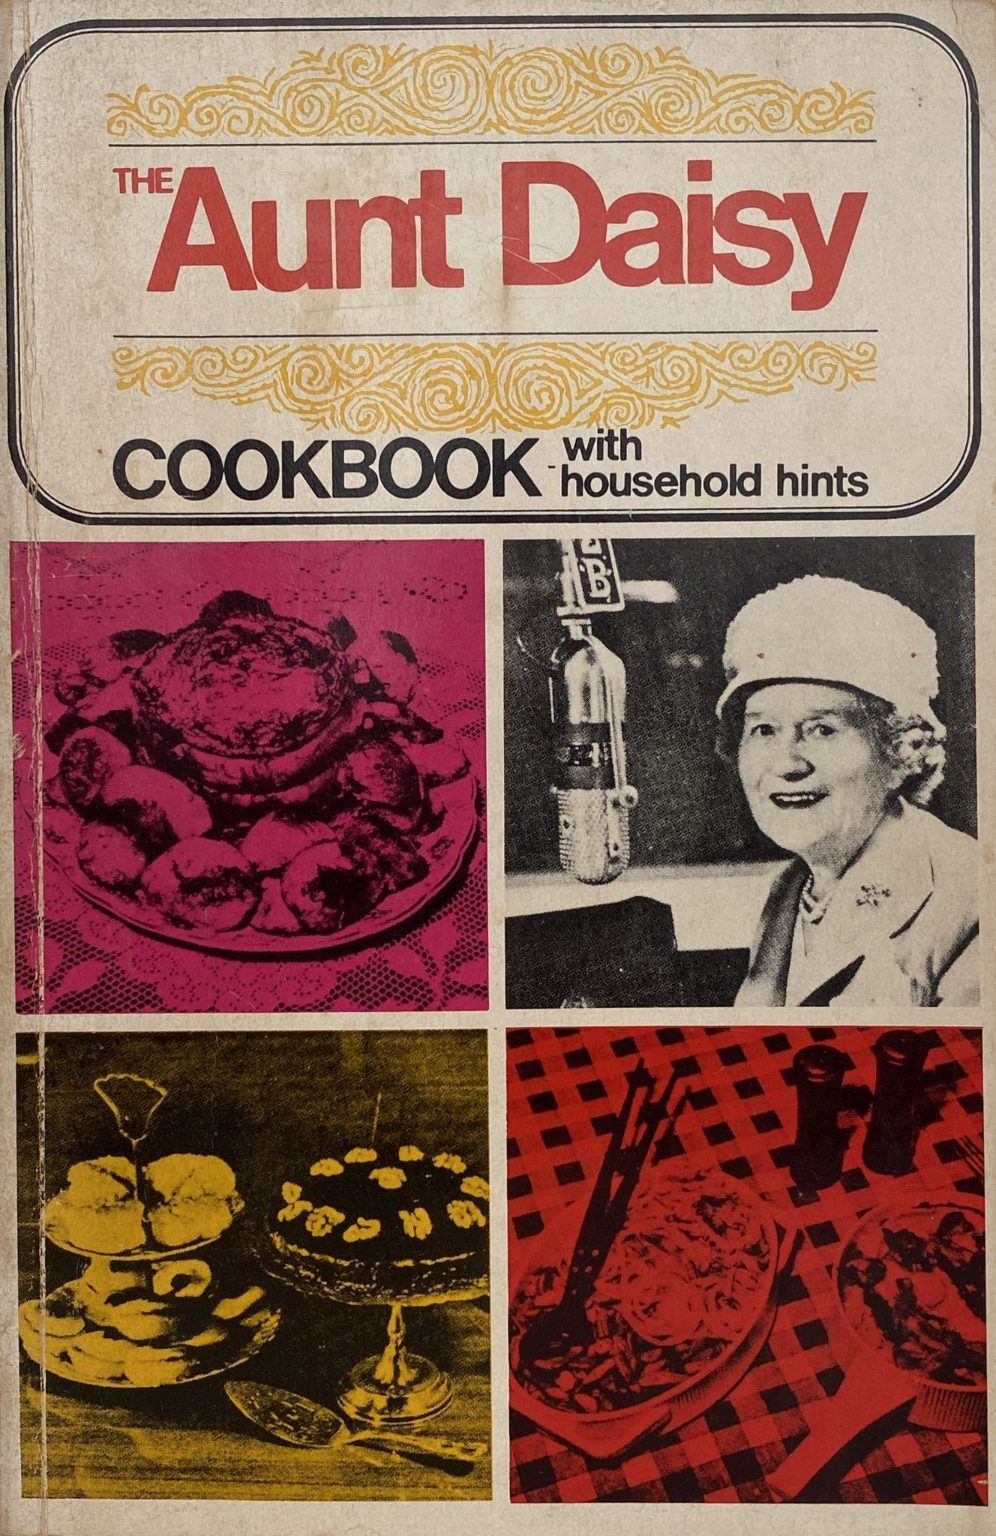 AUNT DAISY Cookbook with household hints